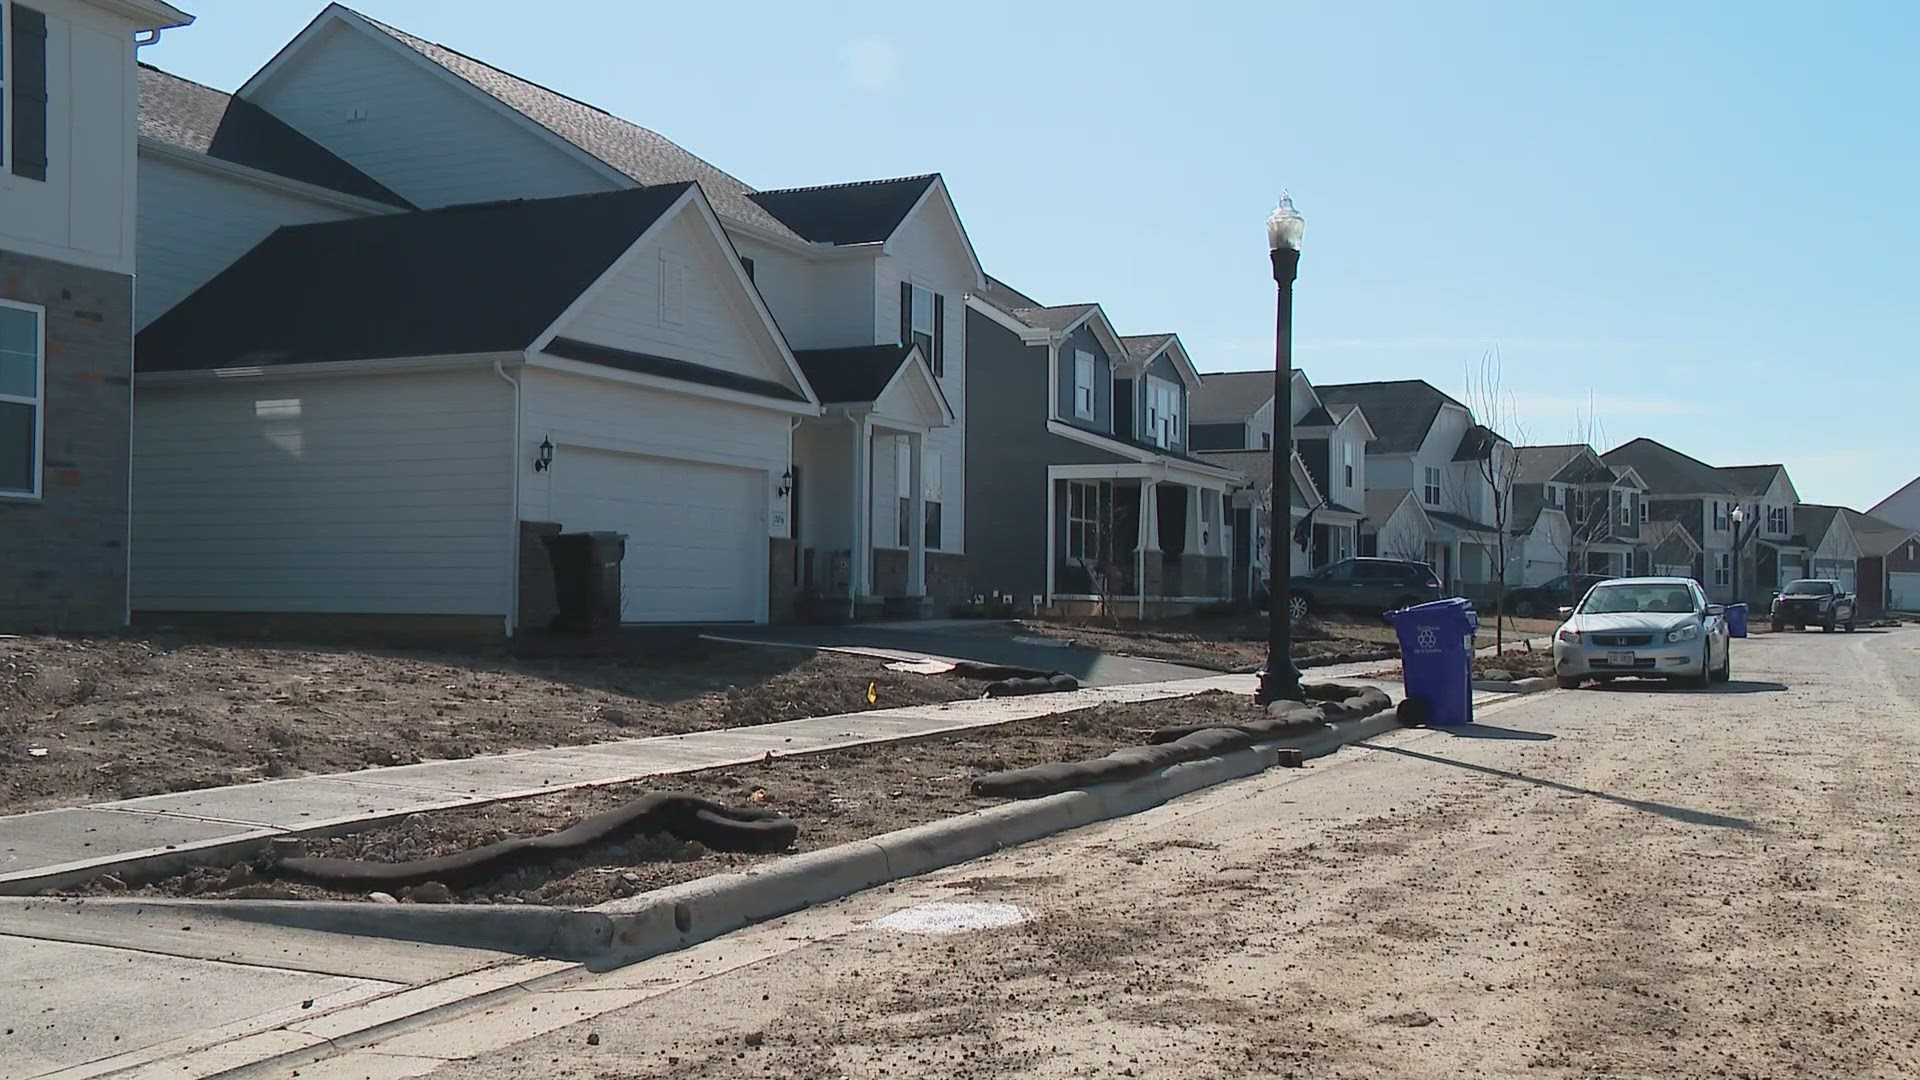 Construction crews are working rapidly on what will be an additional 800 homes and separate apartment buildings on the west side of Columbus.